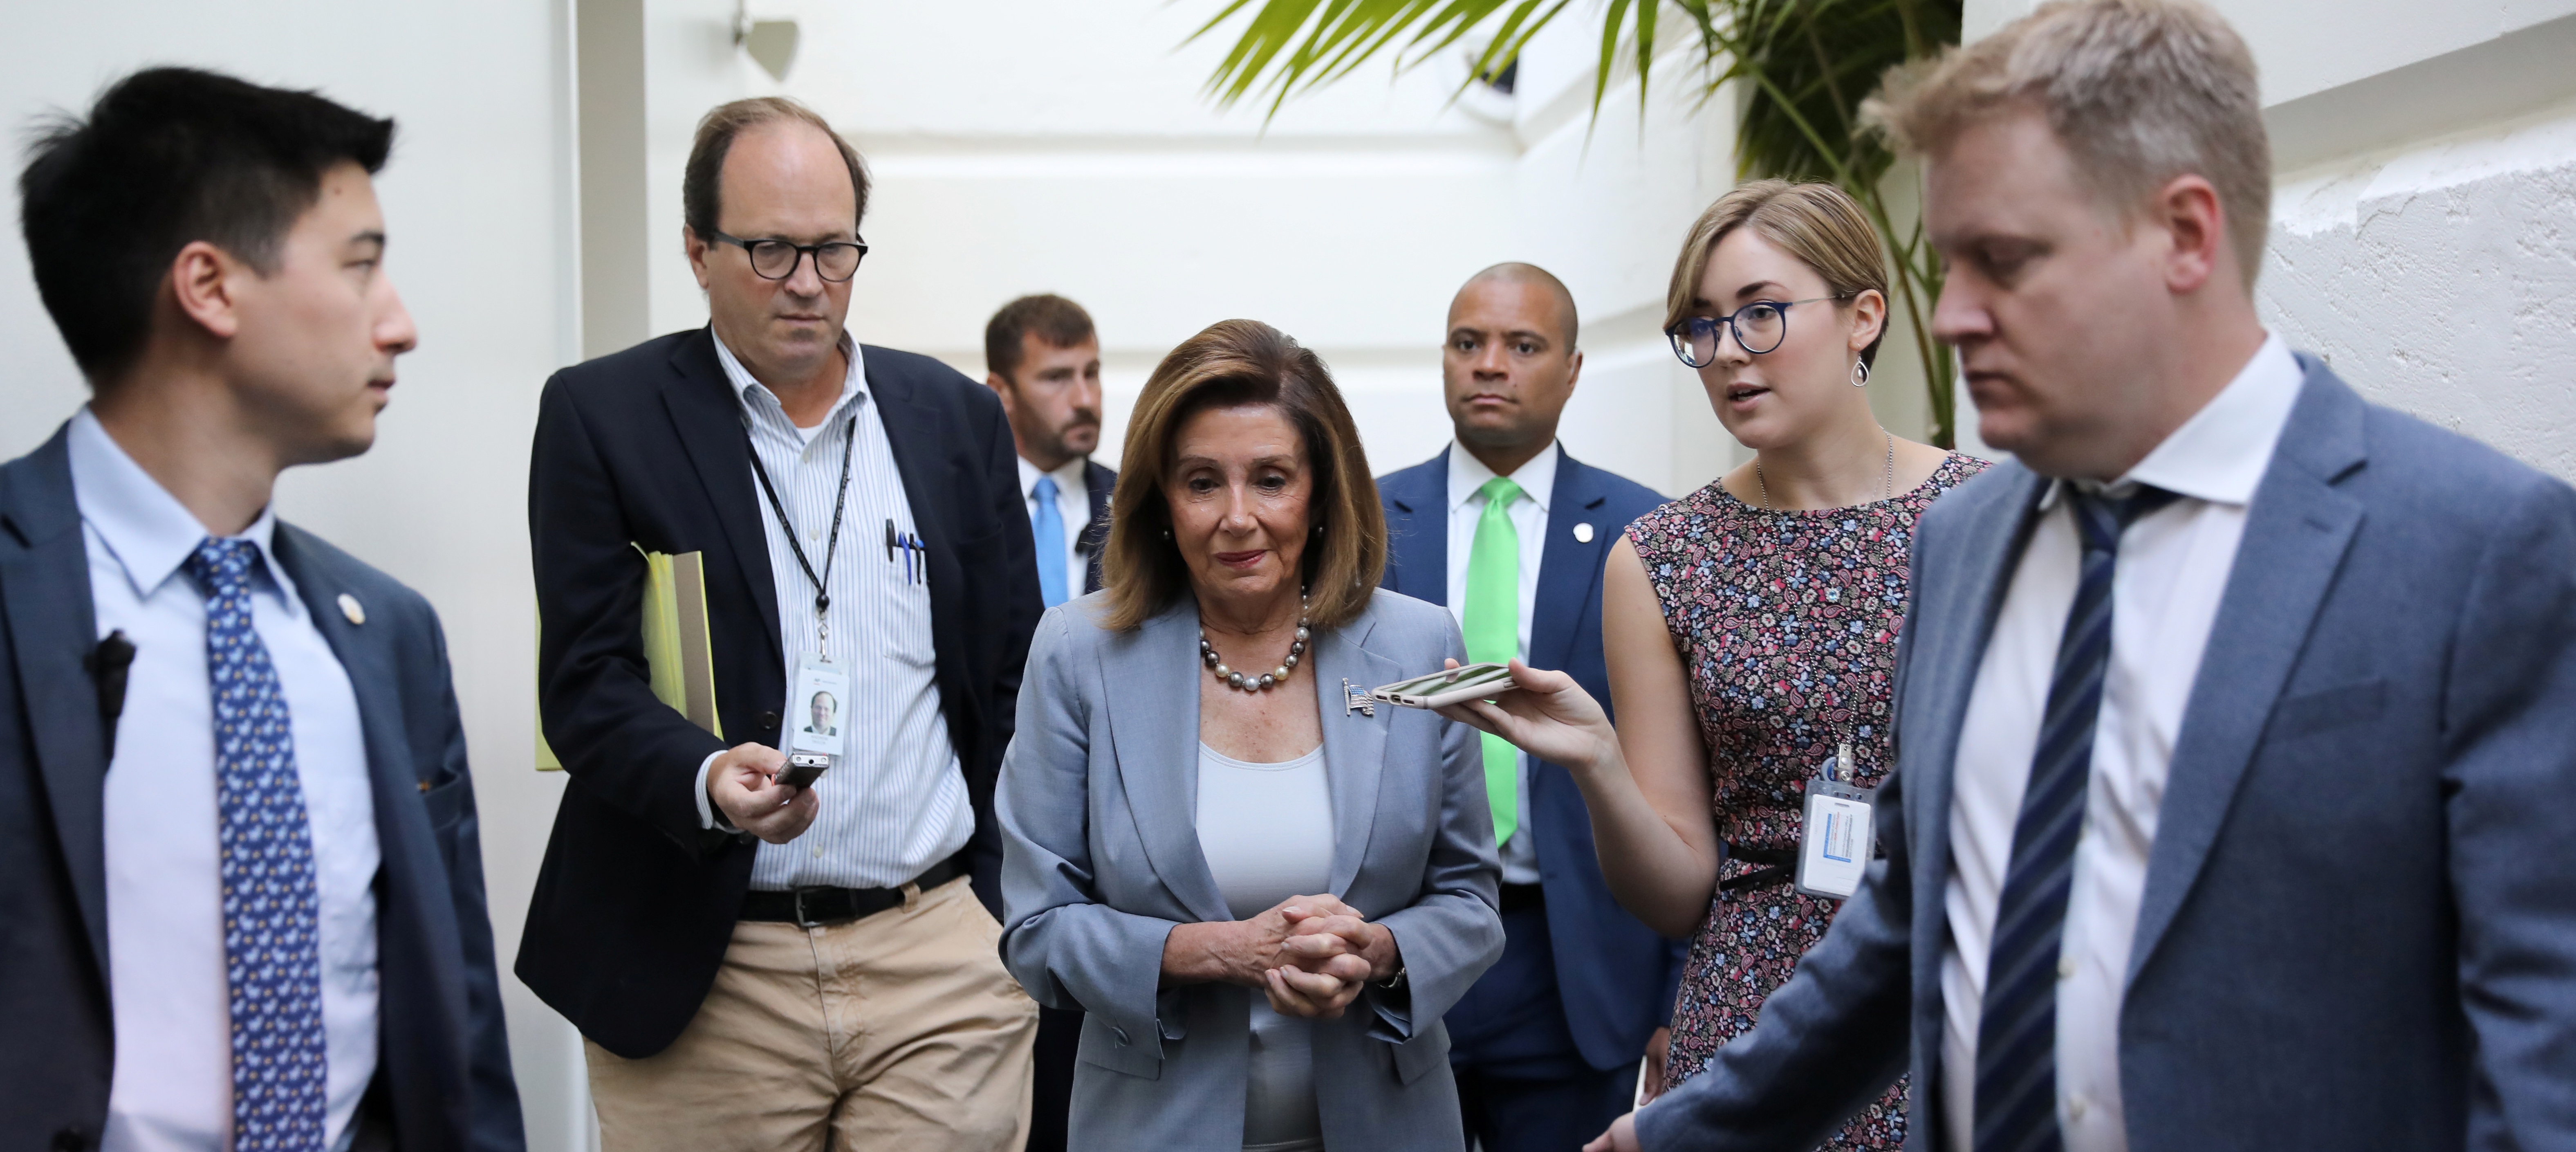 U.S. House Speaker Nancy Pelosi (D-CA) arrives for a House Democratic caucus meeting at the U.S. Capitol in Washington, U.S. September 18, 2019. REUTERS/Jonathan Ernst